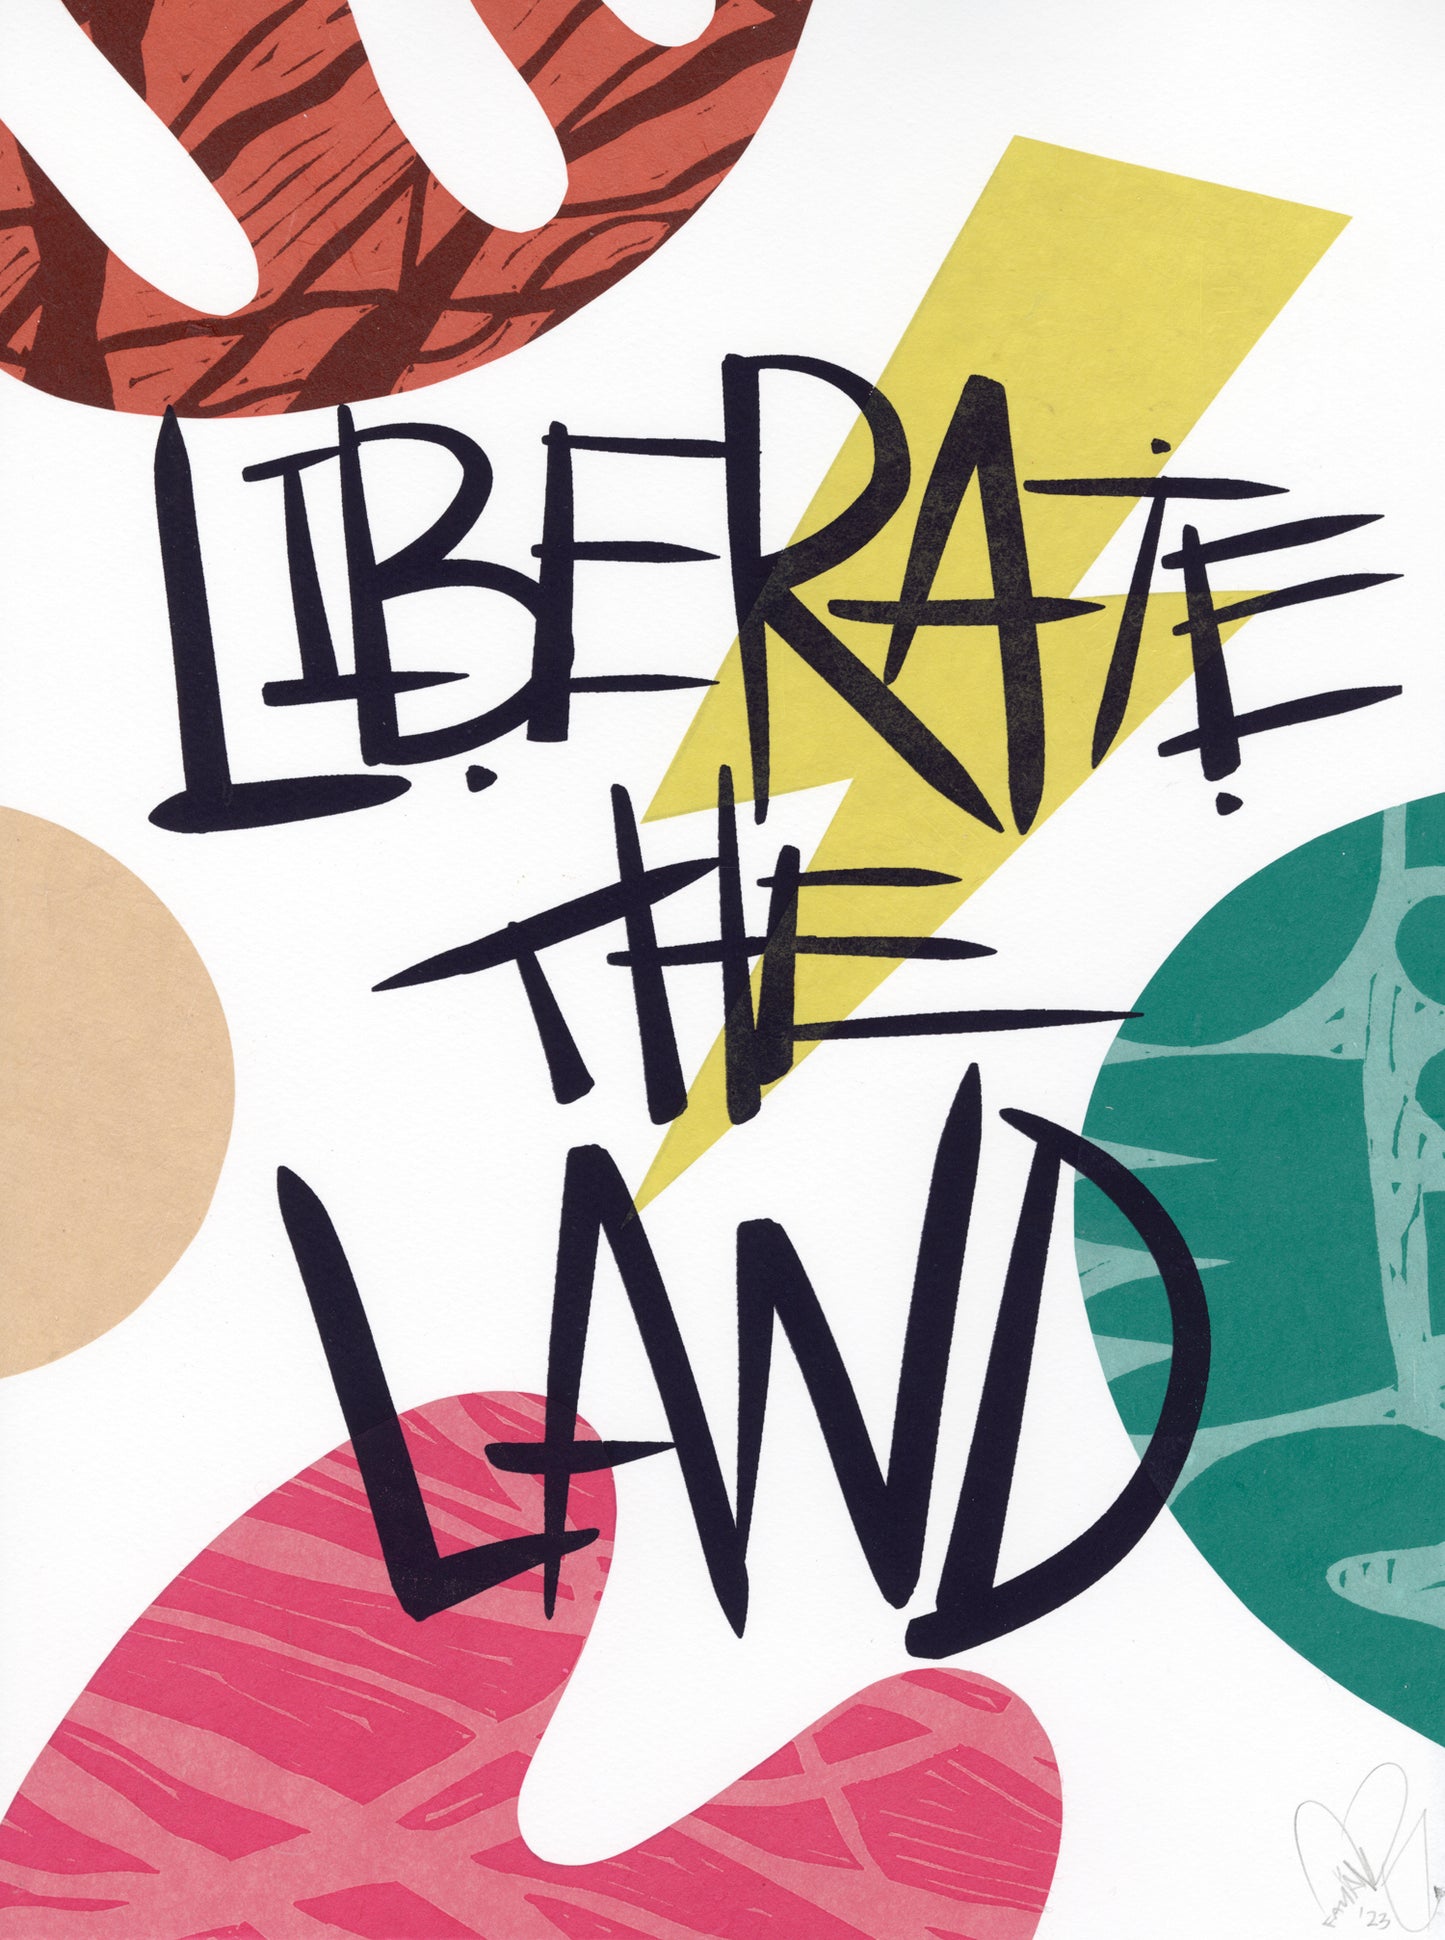 Liberate The Land 17